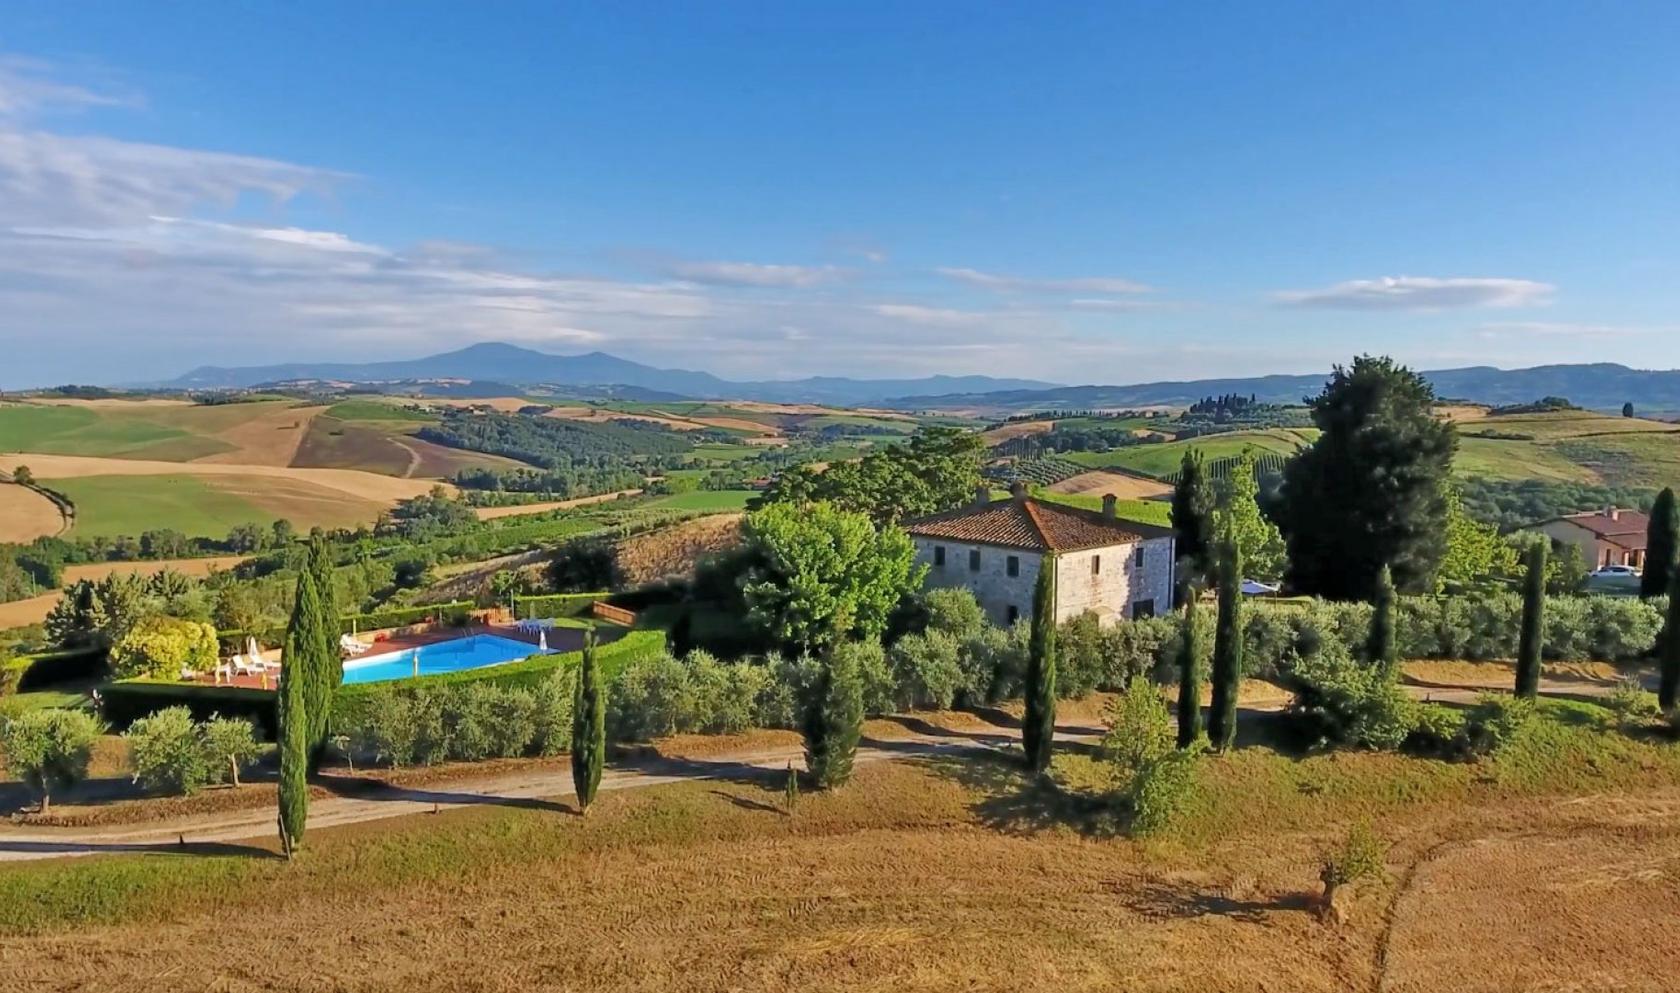 Toscana Immobiliare - Farm estate with vineyards for sale in Montalcino Tuscany